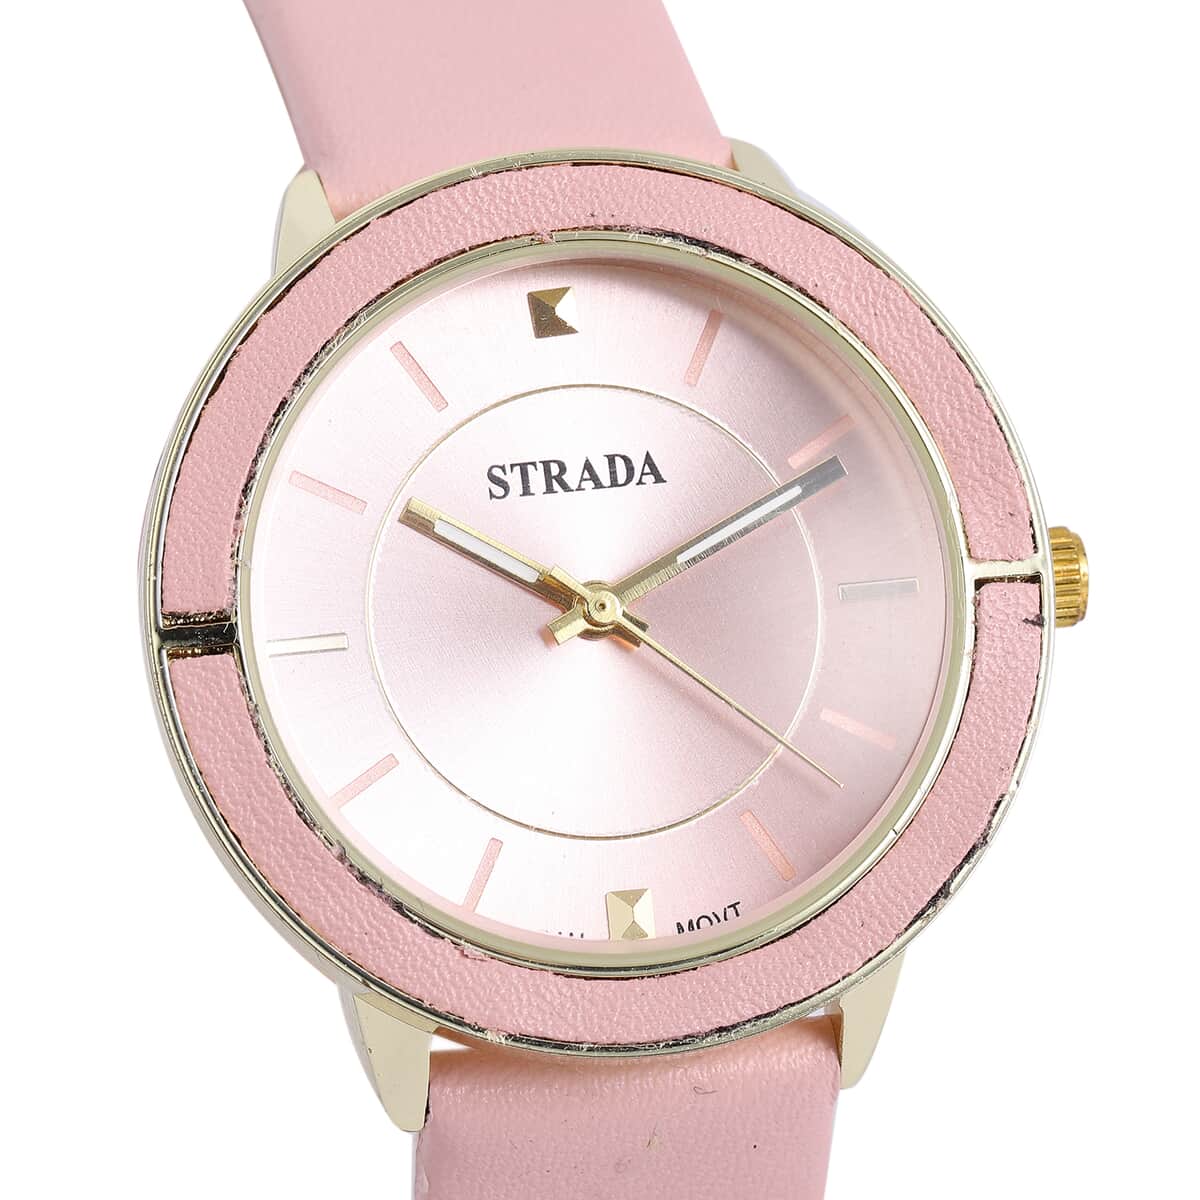 Strada Japanese Movement Water Resistant Watch with Pink Faux Leather Band image number 3